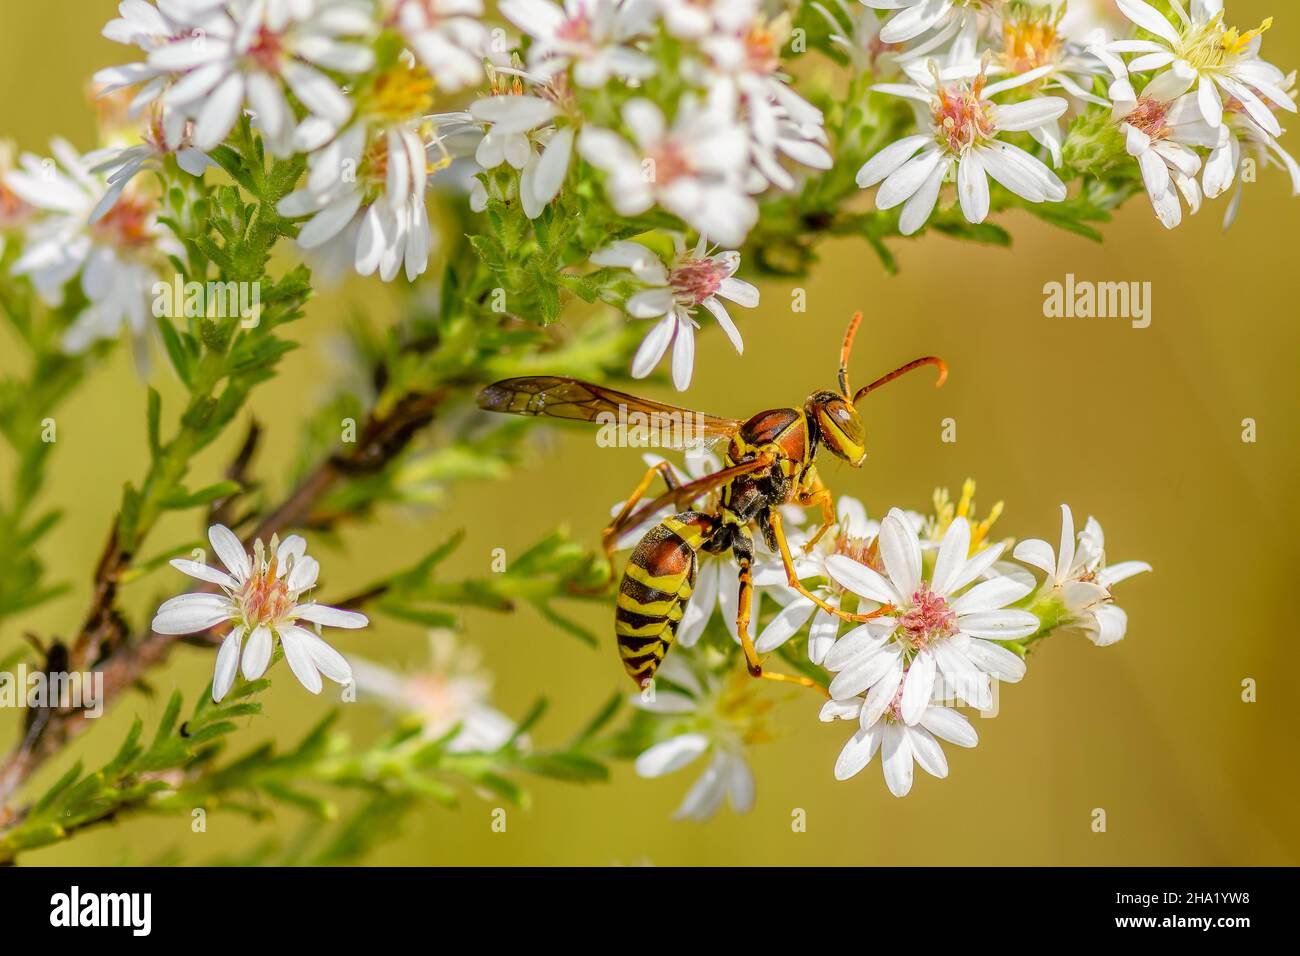 A Paper Wasp - Polistes dorsalis - on Heath Aster flowers - Symphyotrichum ericoides - gathering nector Stock Photo